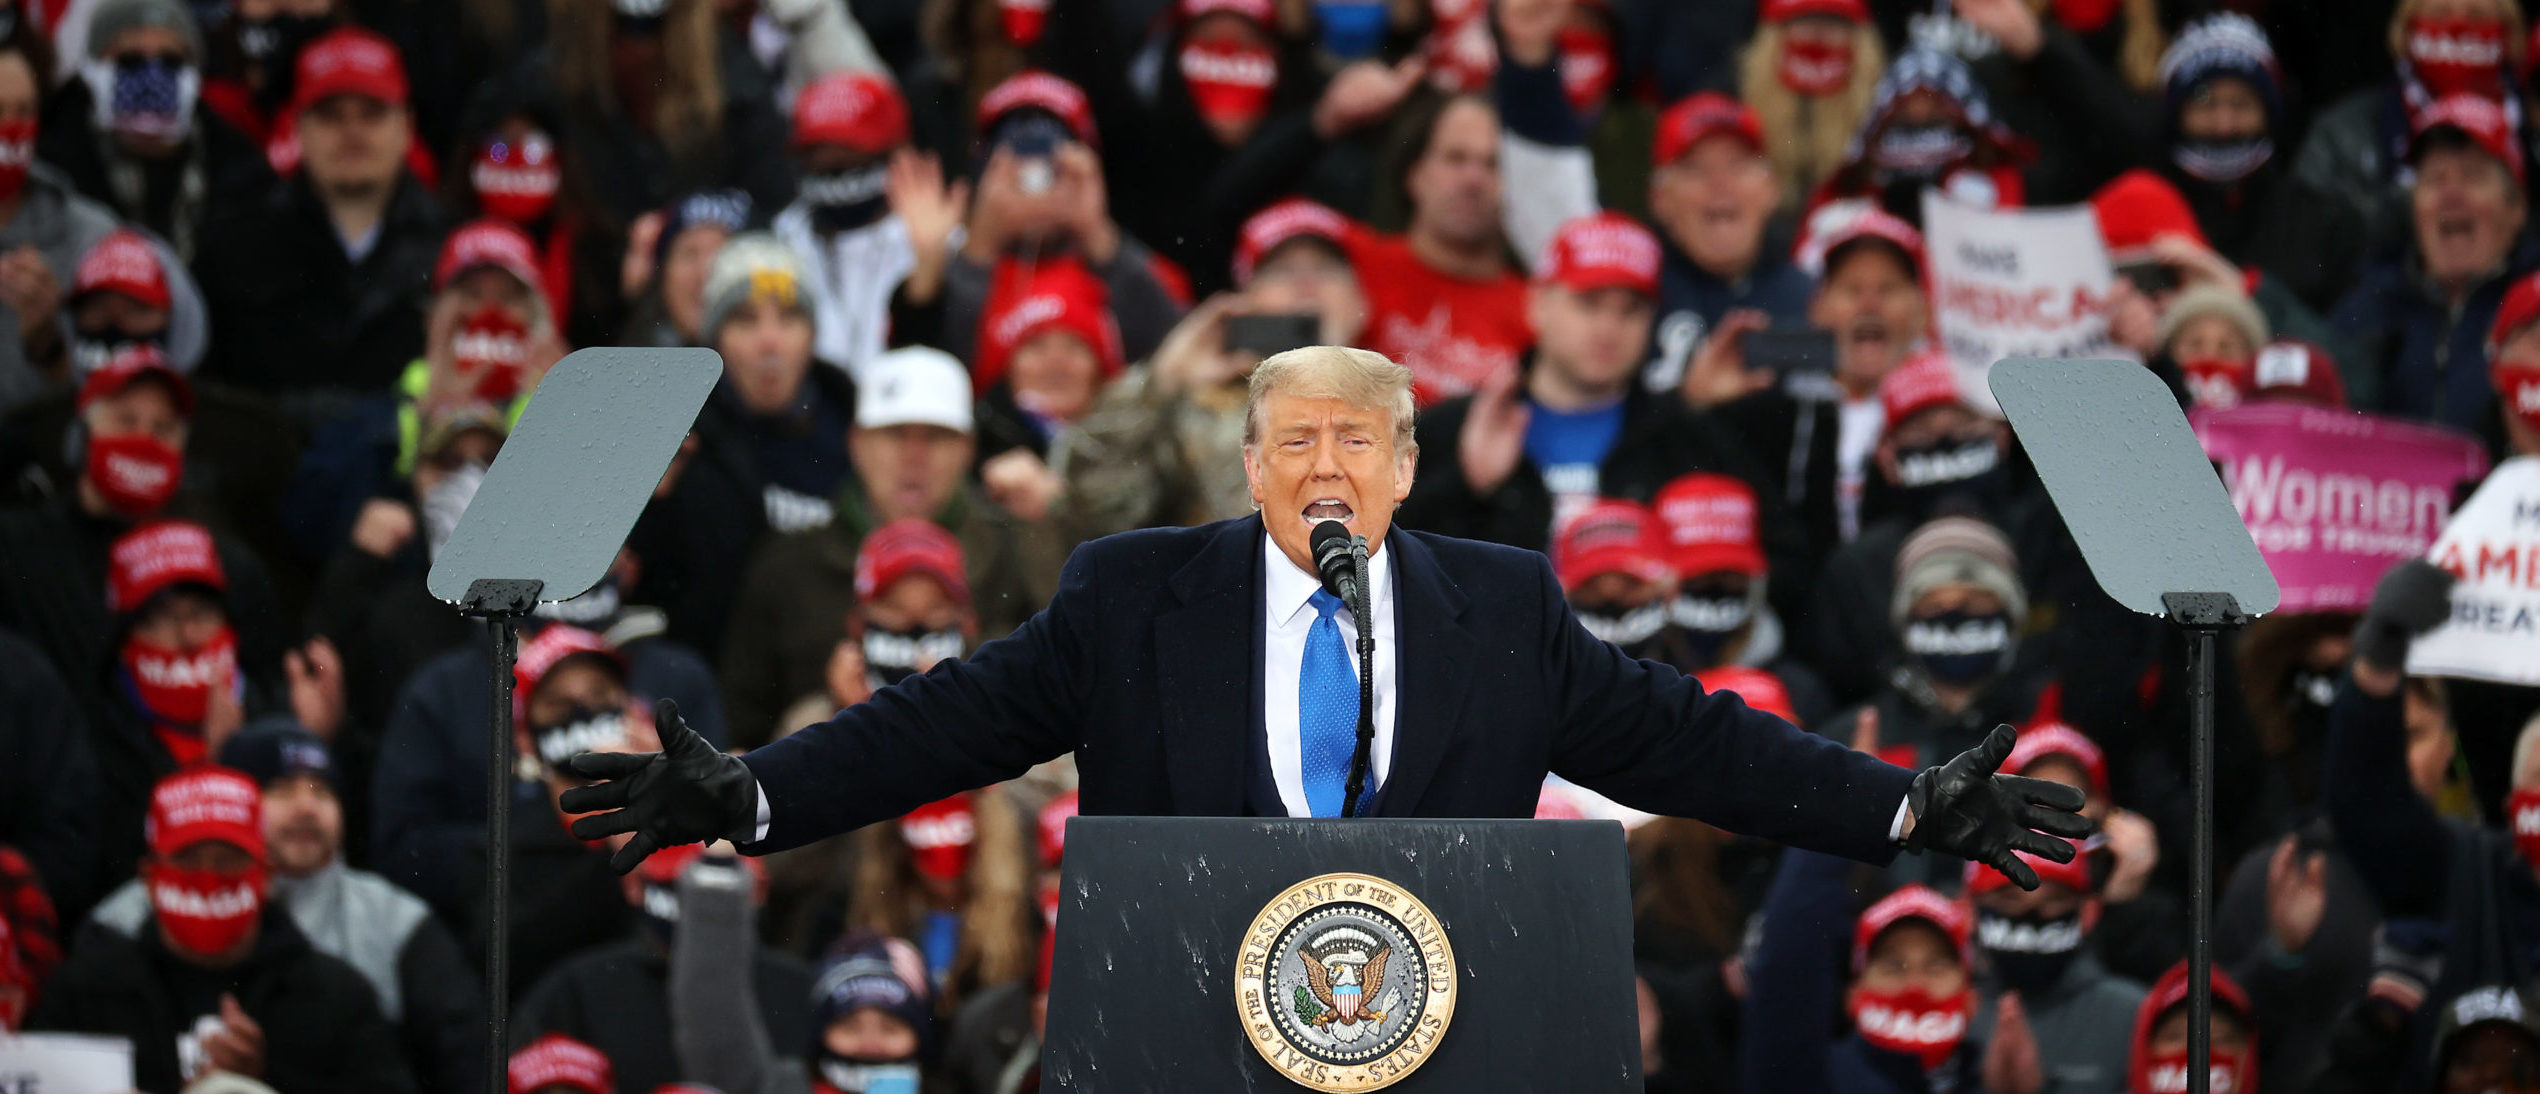 LANSING, MICHIGAN - OCTOBER 27: U.S. President Donald Trump addresses supporters during a campaign rally at Capital Region International Airport October 27, 2020 in Lansing, Michigan. With one week until Election Day, Trump is campaigning in Michigan, a state he won in 2016 by less than 11,000 votes, the narrowest margin of victory in the state's presidential election history. (Photo by Chip Somodevilla/Getty Images)